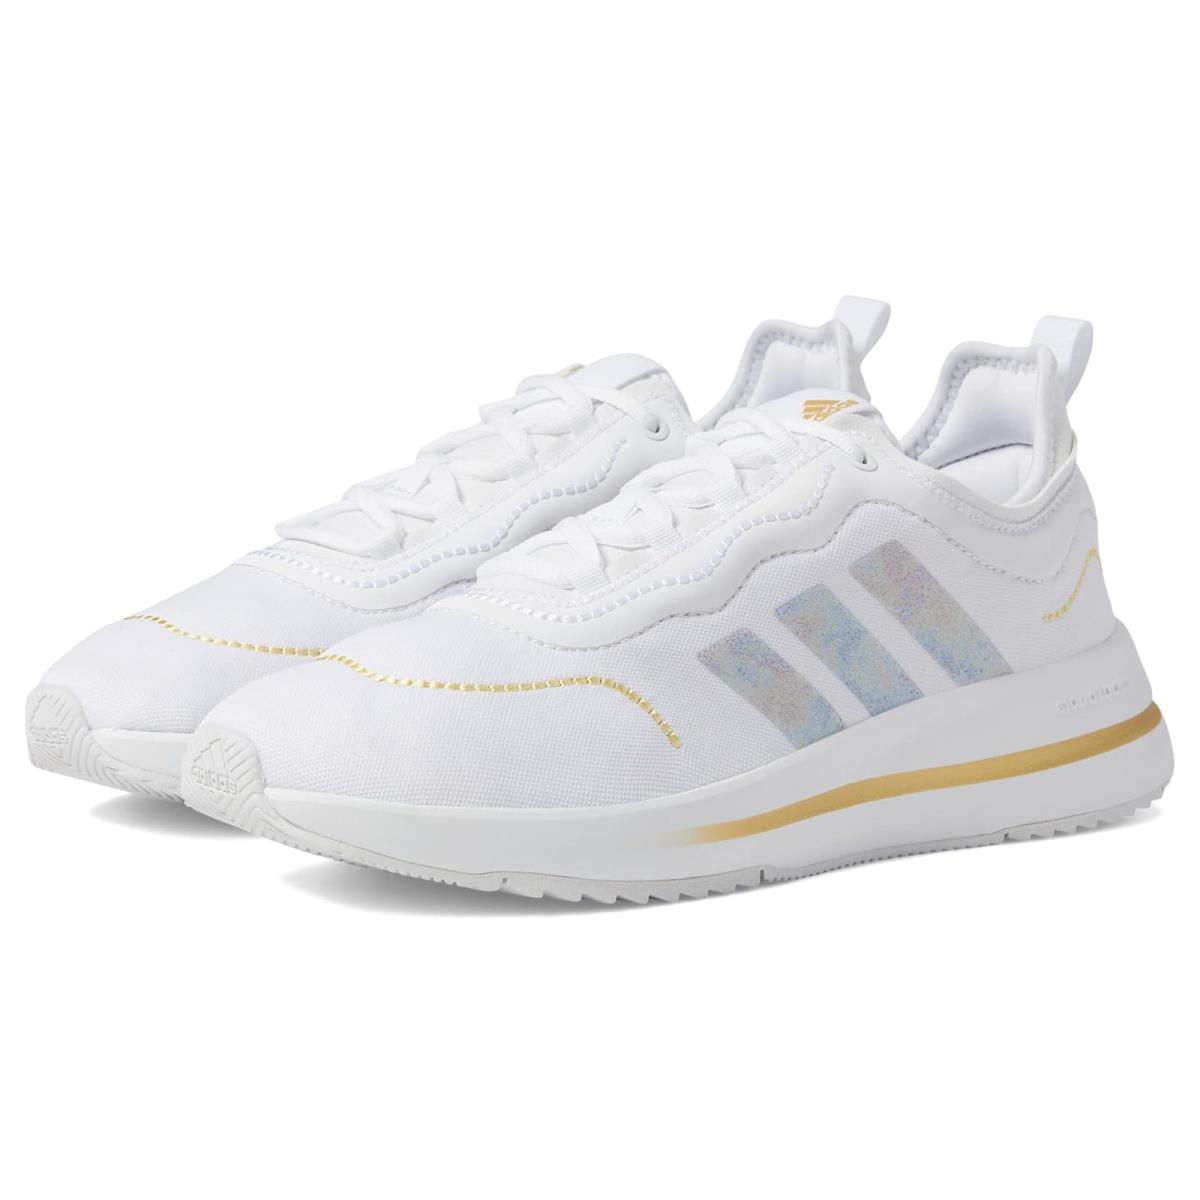 Woman`s Sneakers Athletic Shoes Adidas Running Comfort Runner White/White/Matte Gold